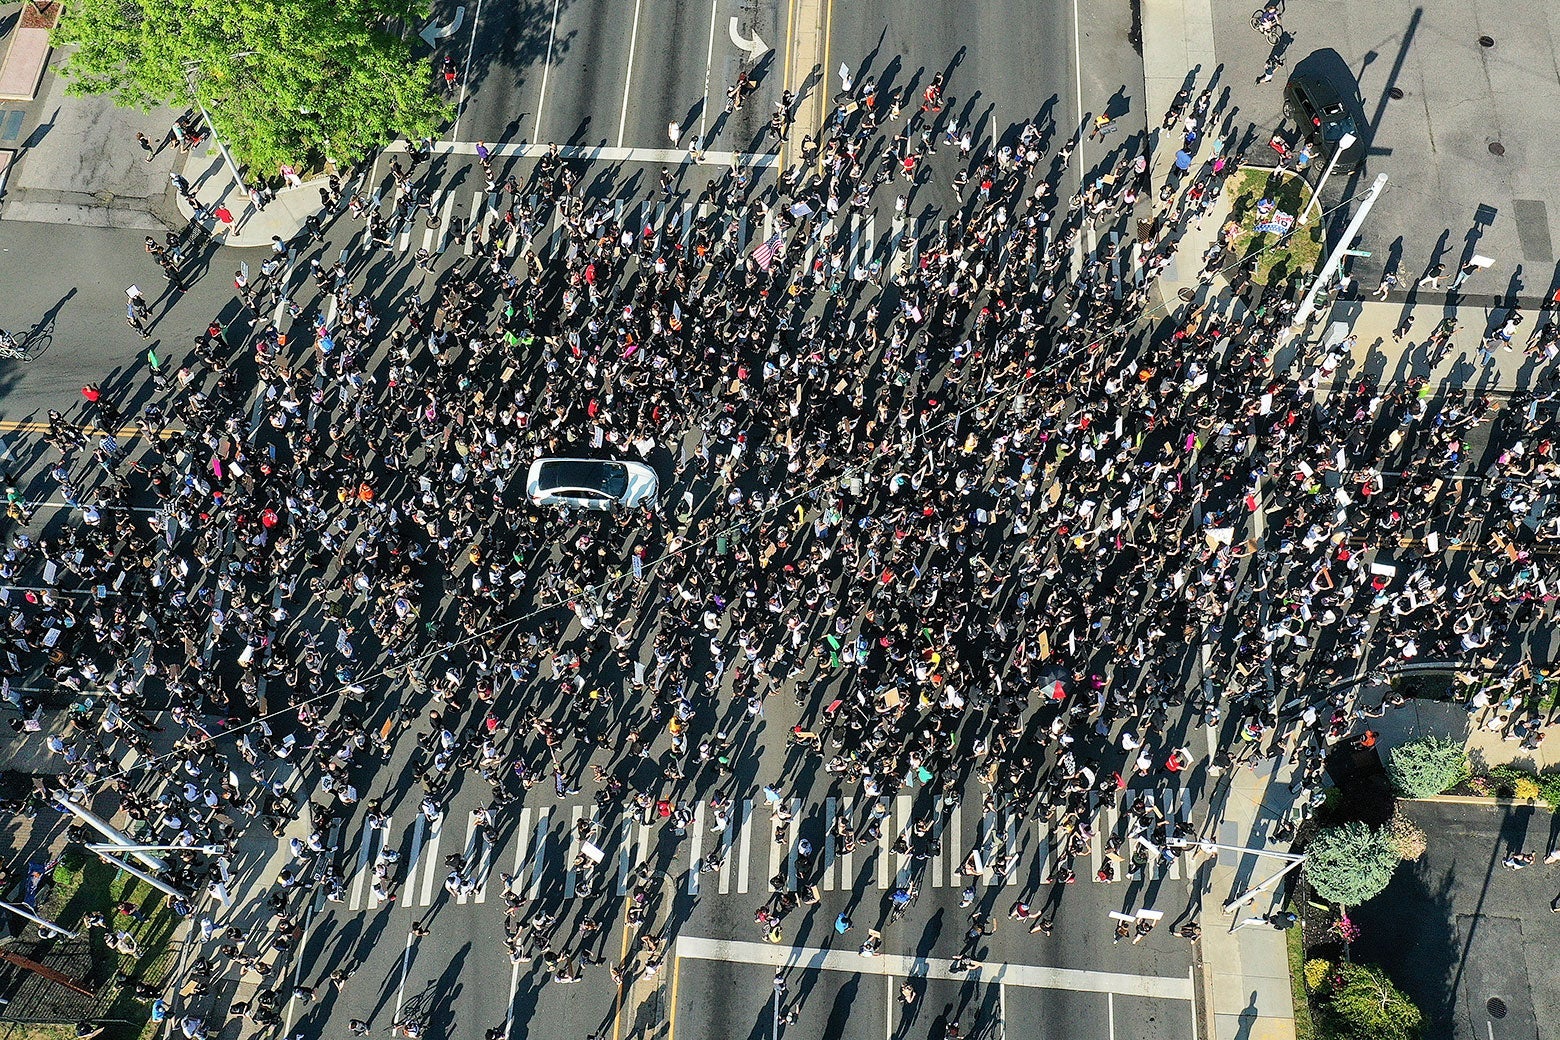 Aerial view of a large crowd of protesters marching through an intersection